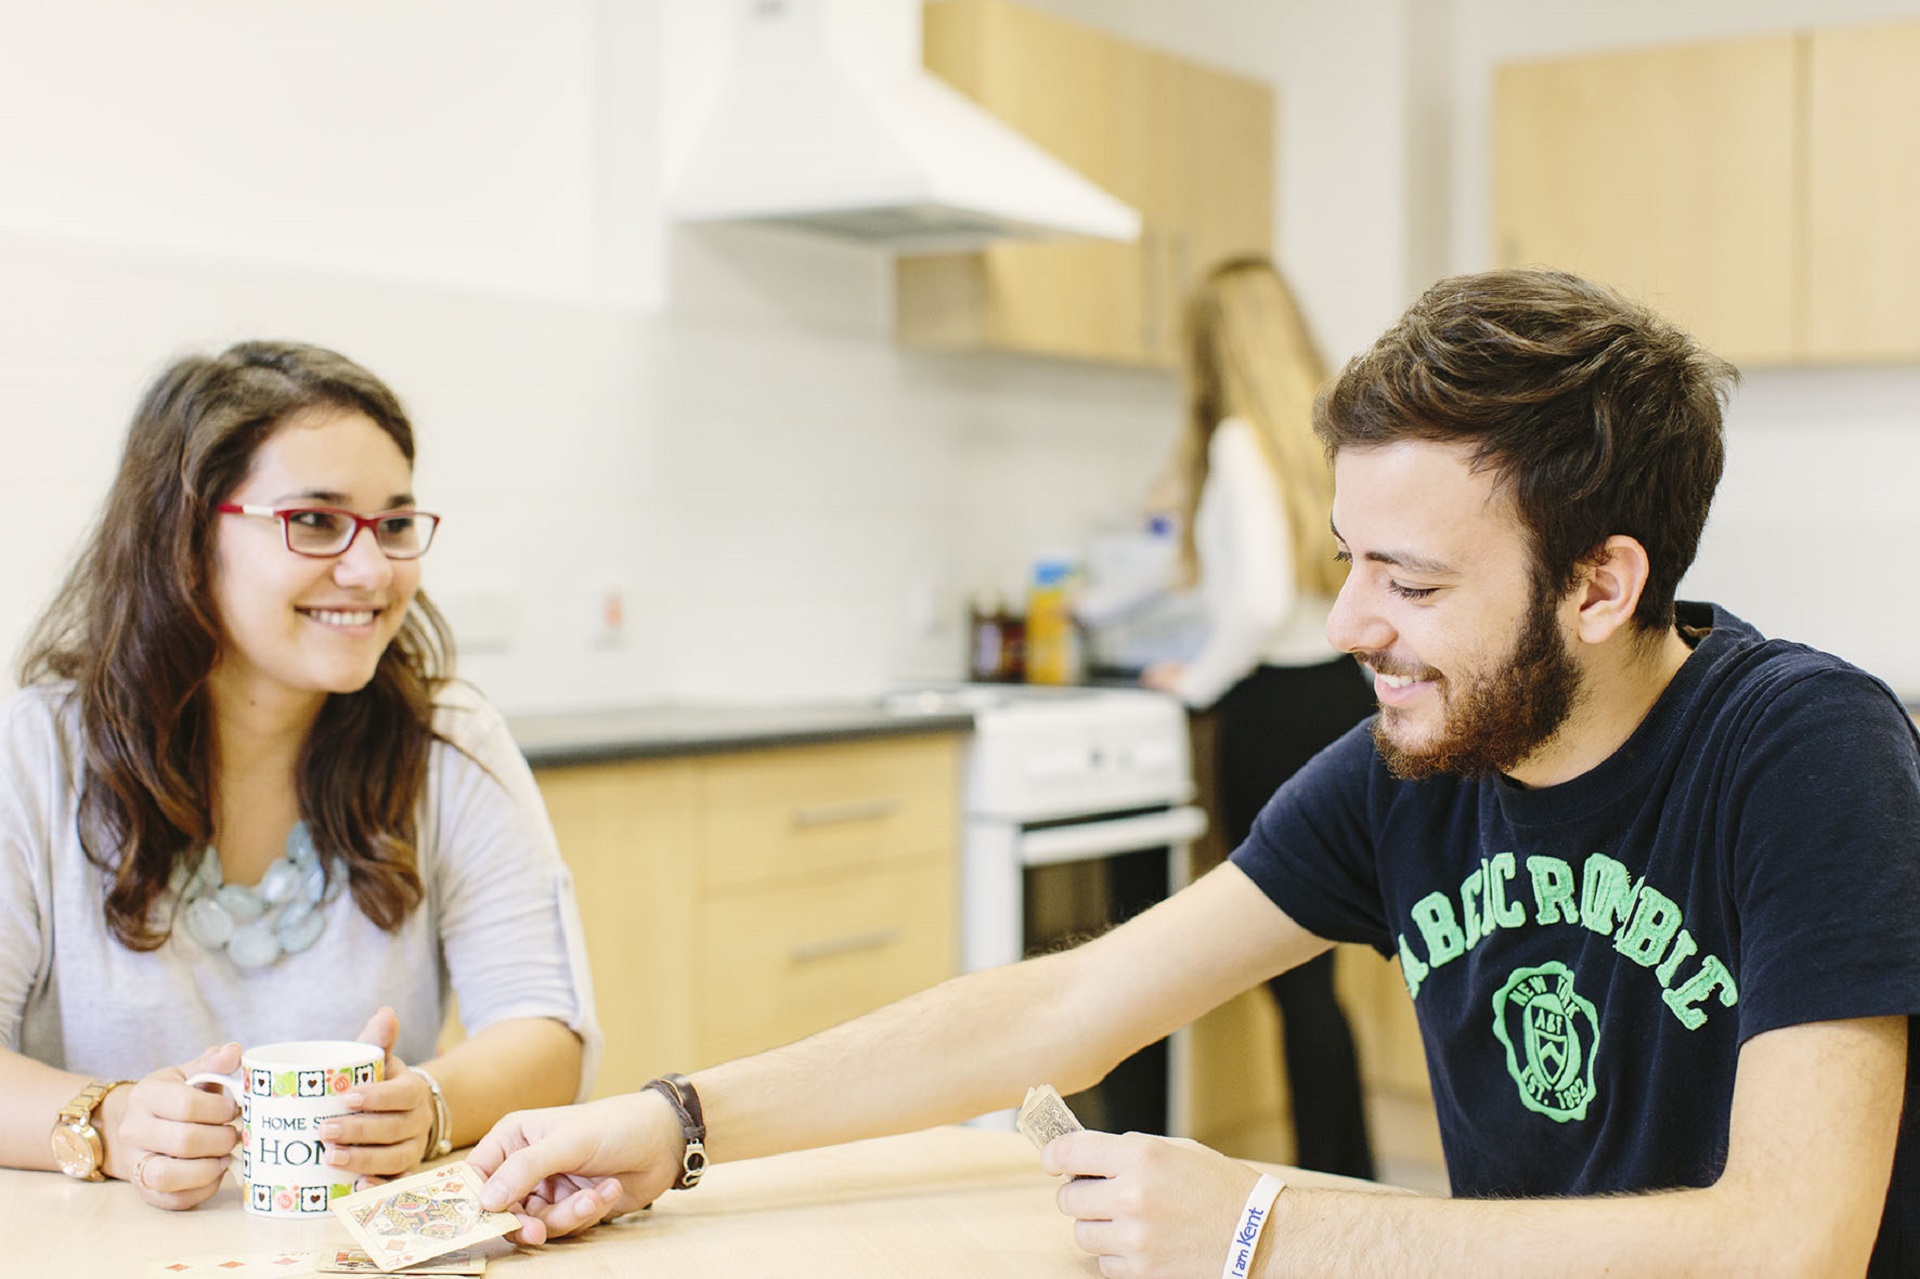 Students talking in a communal kitchen